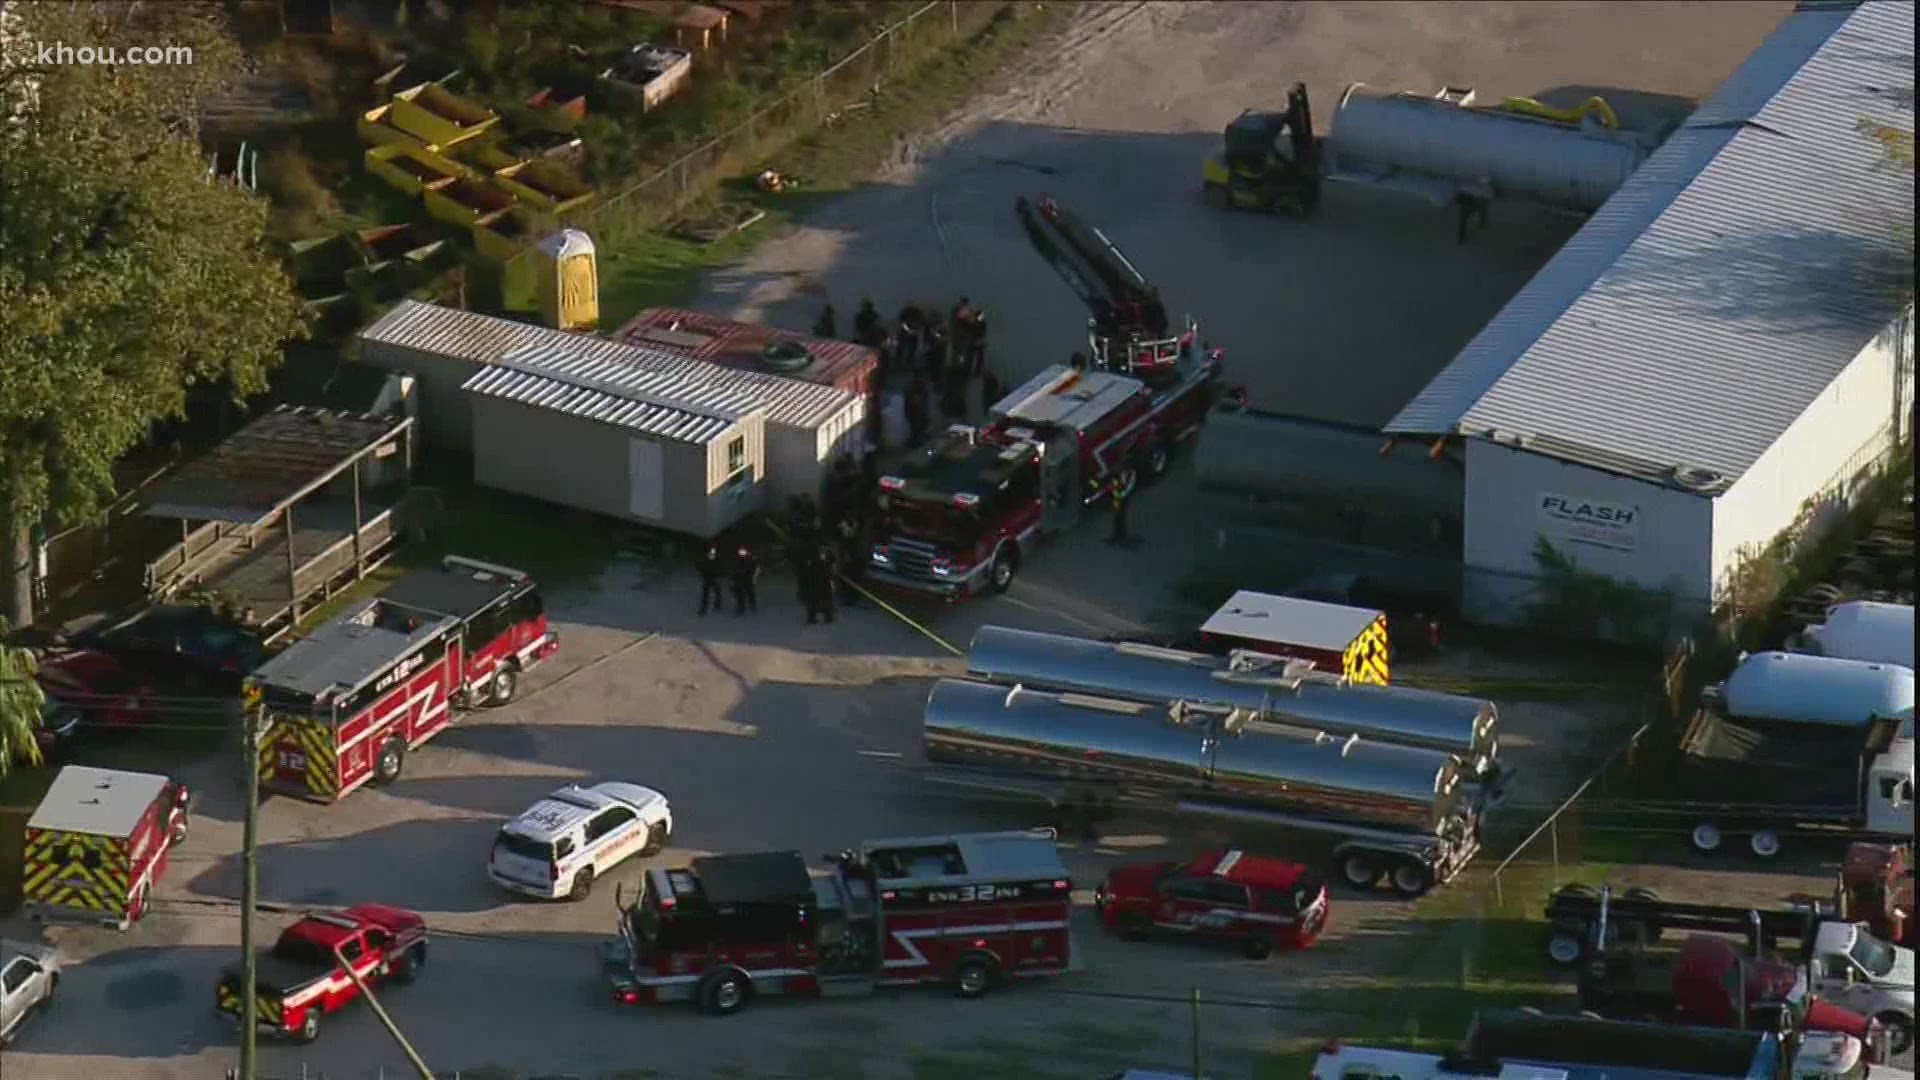 The worker is stuck in a tanker in Channelview and emergency crews are attempting to reach the person.